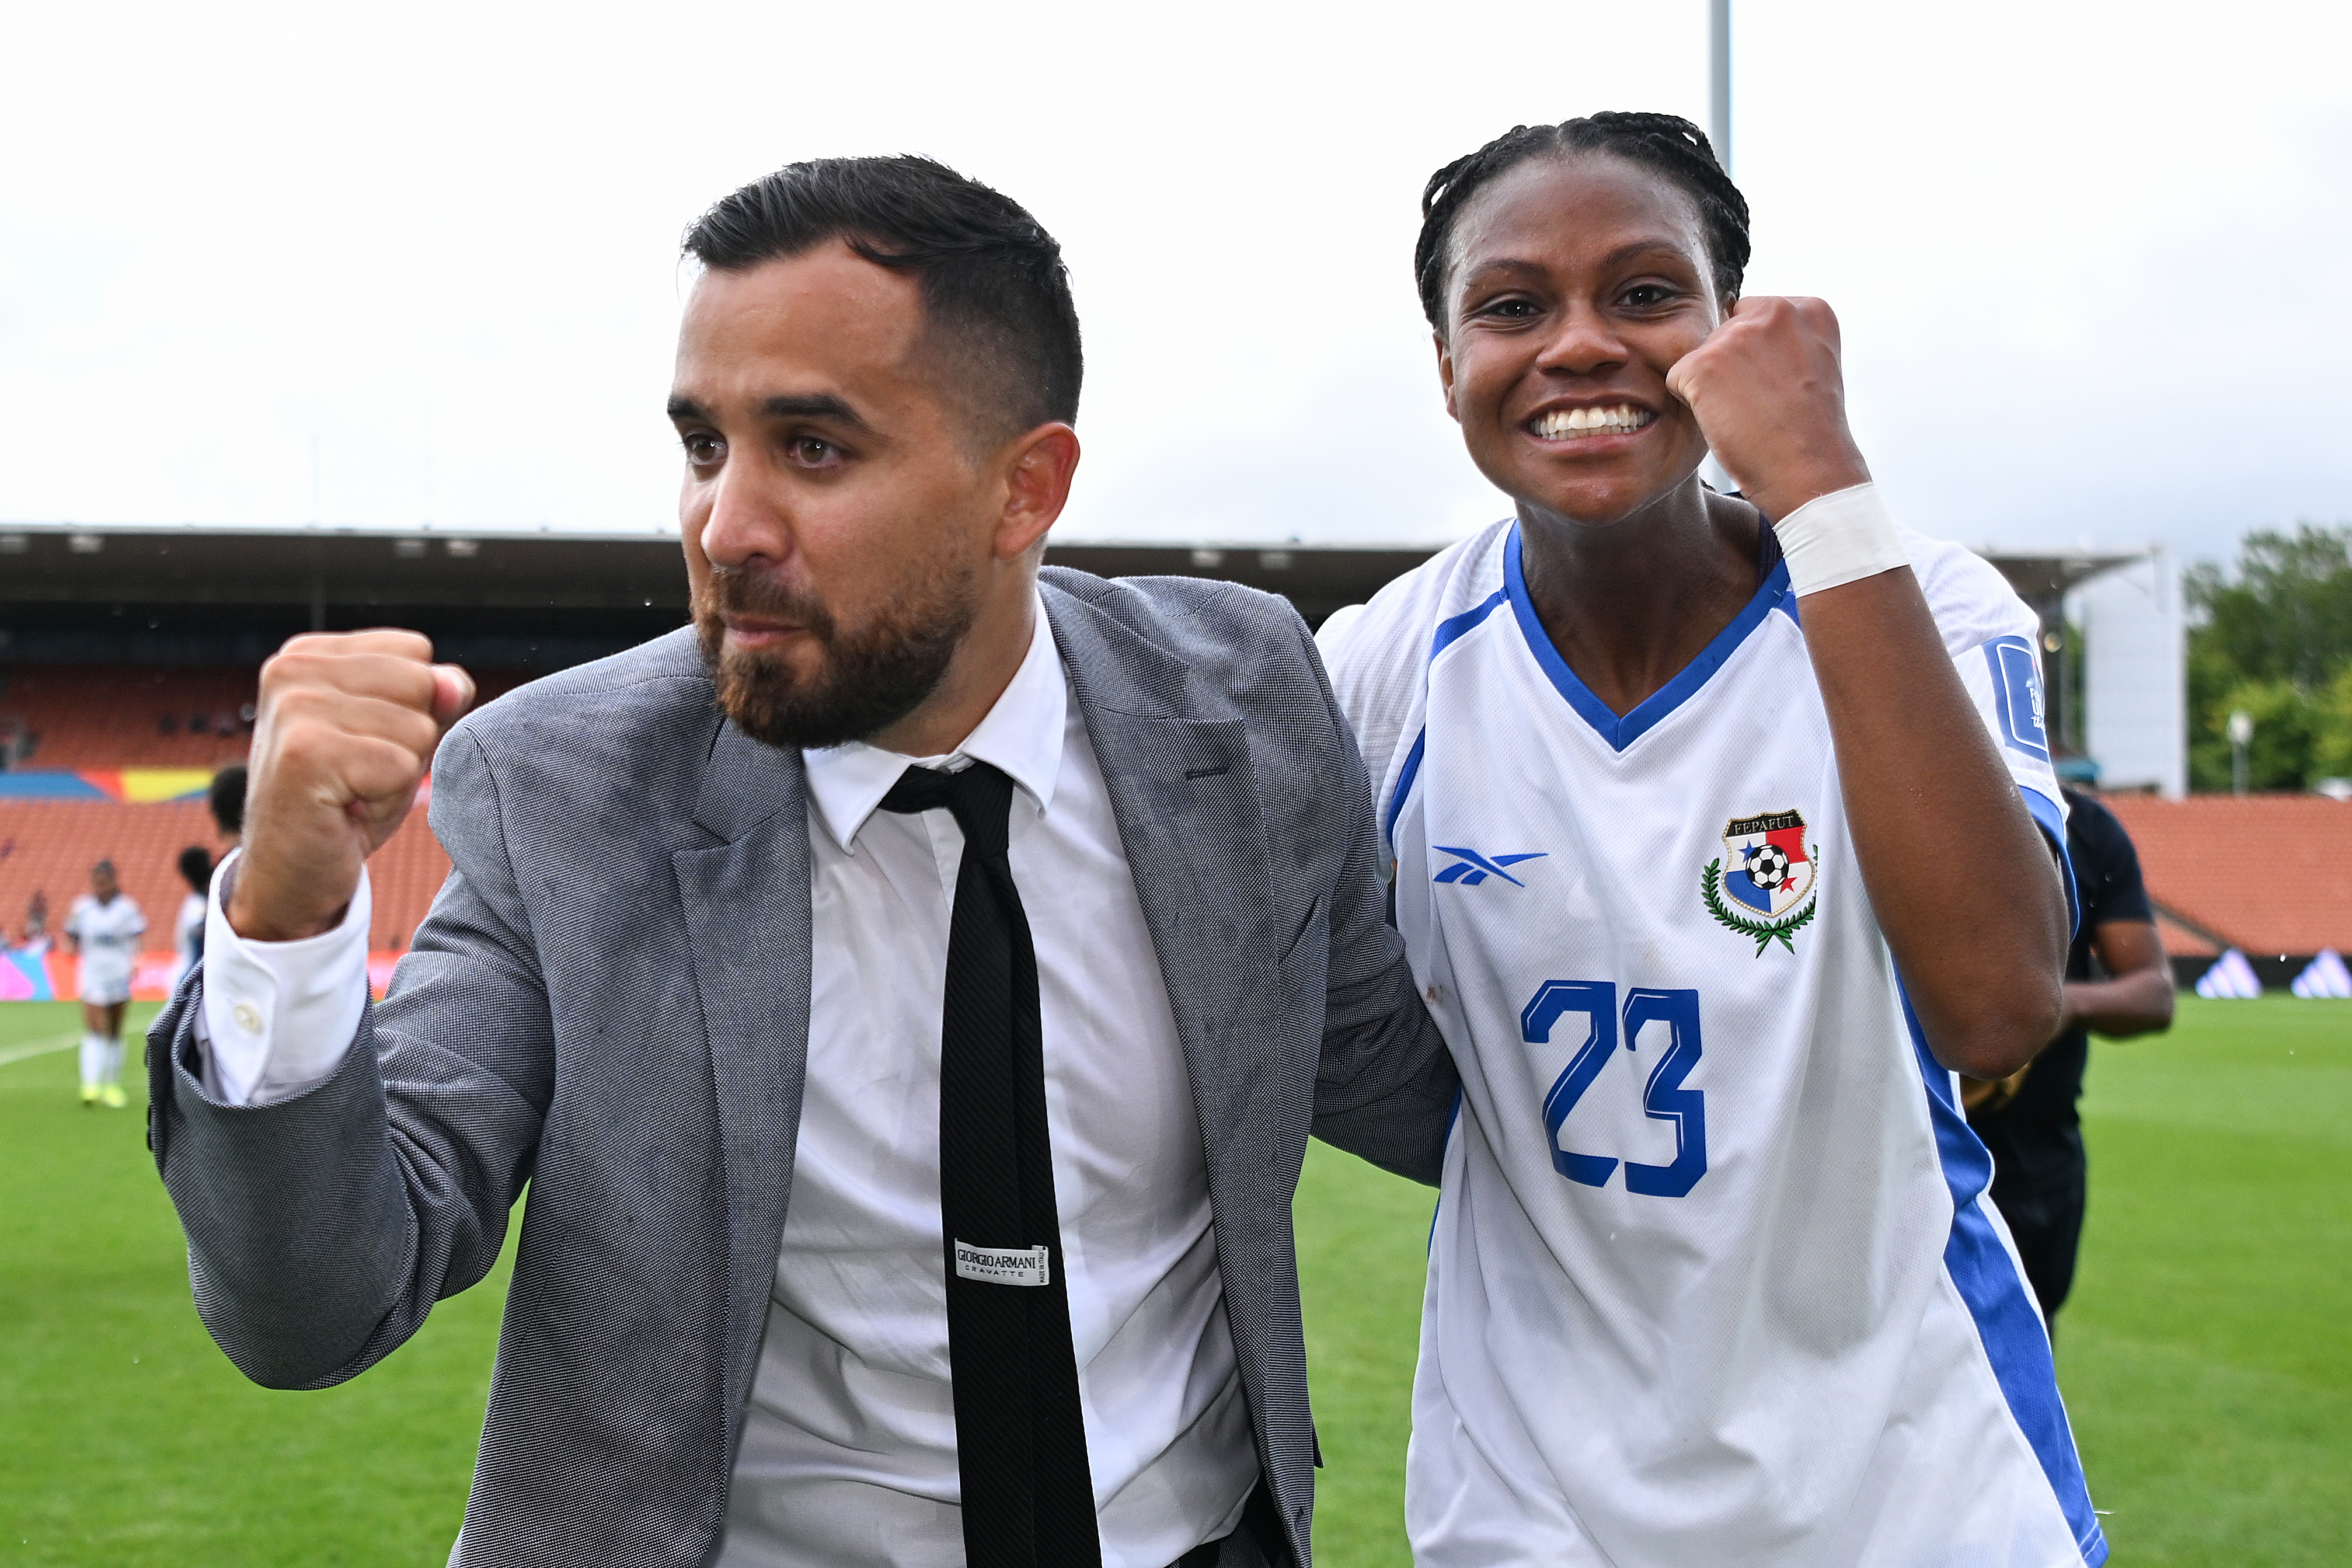 Ignacio Quintana (L), head coach of Panama, and player Carina Baltrip-Reyes celebrate their win in the 2023 FIFA Women's World Cup playoff tournament game against Paraguay at Waikato Stadium in Hamilton, New Zealand, February 23, 2023. /CFP 